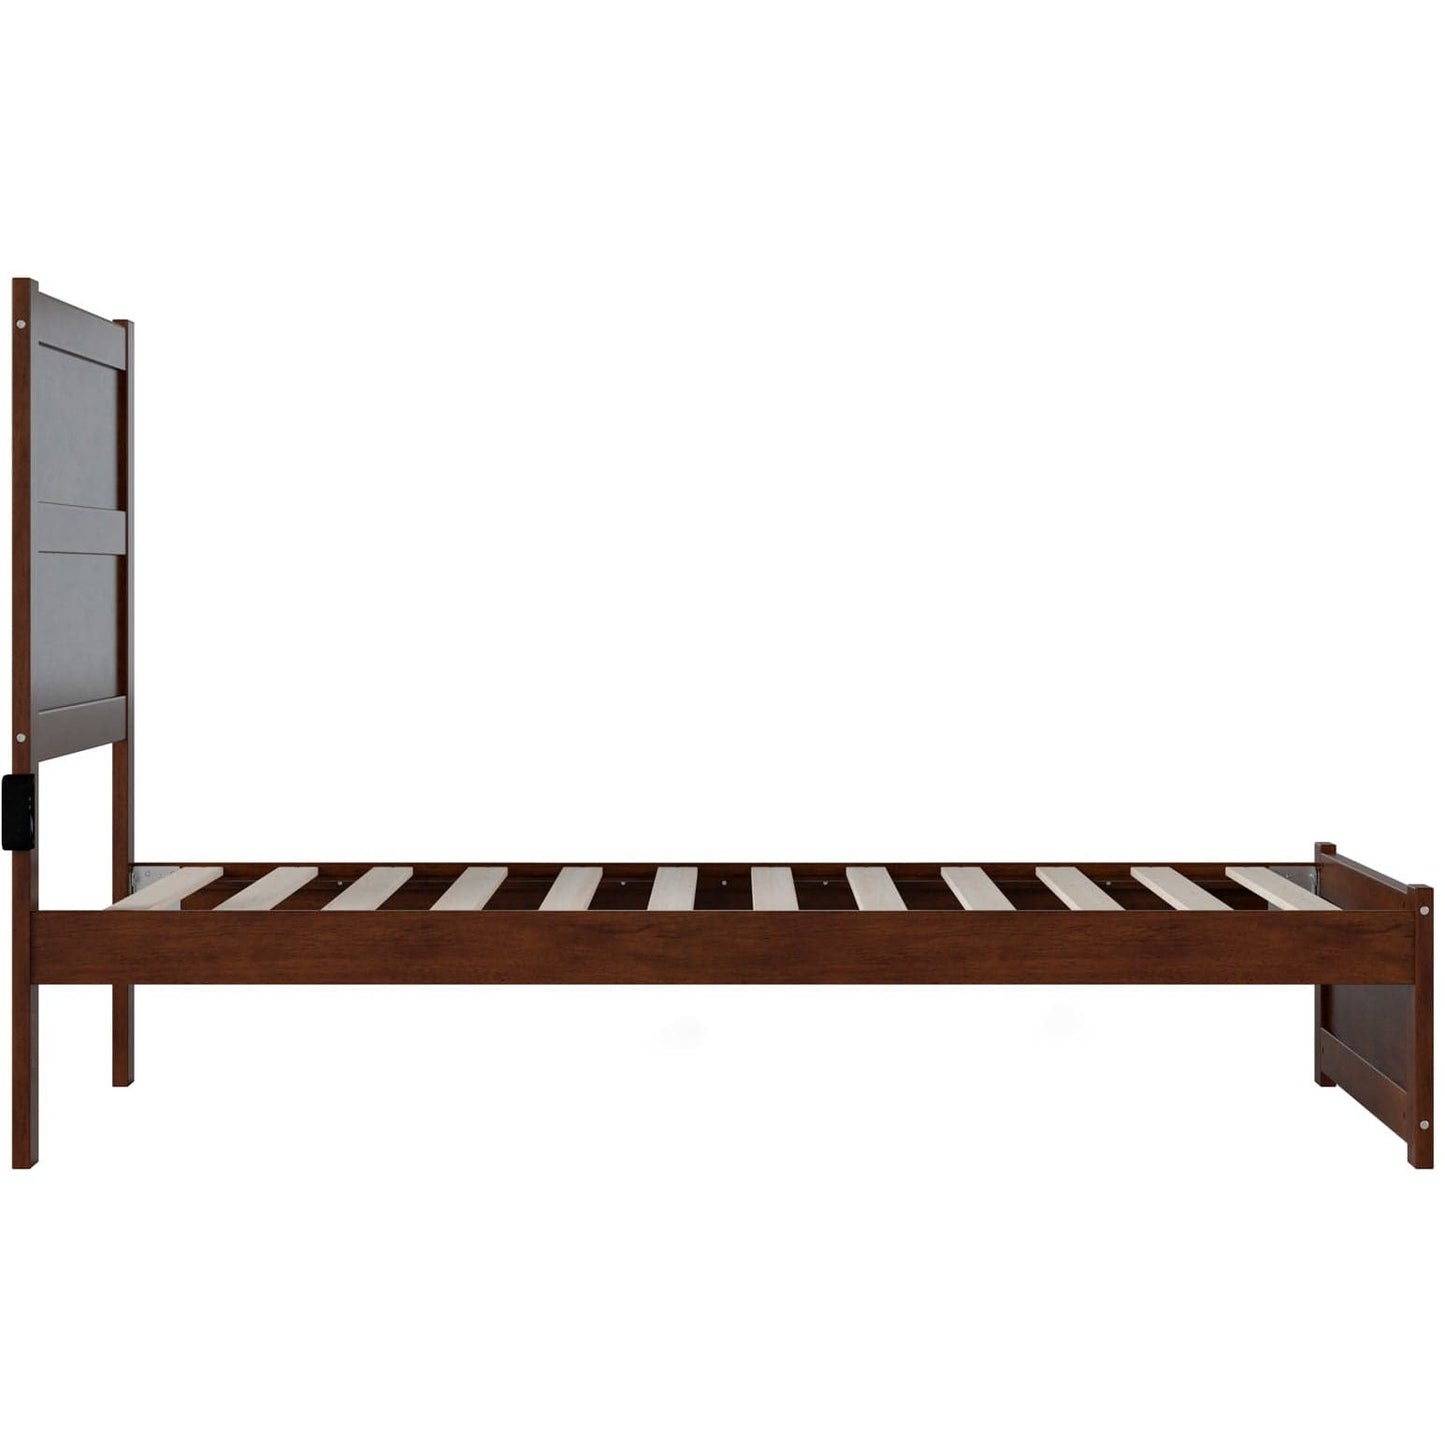 AFI Furnishings NoHo Twin Bed with Footboard in Walnut AG9160024